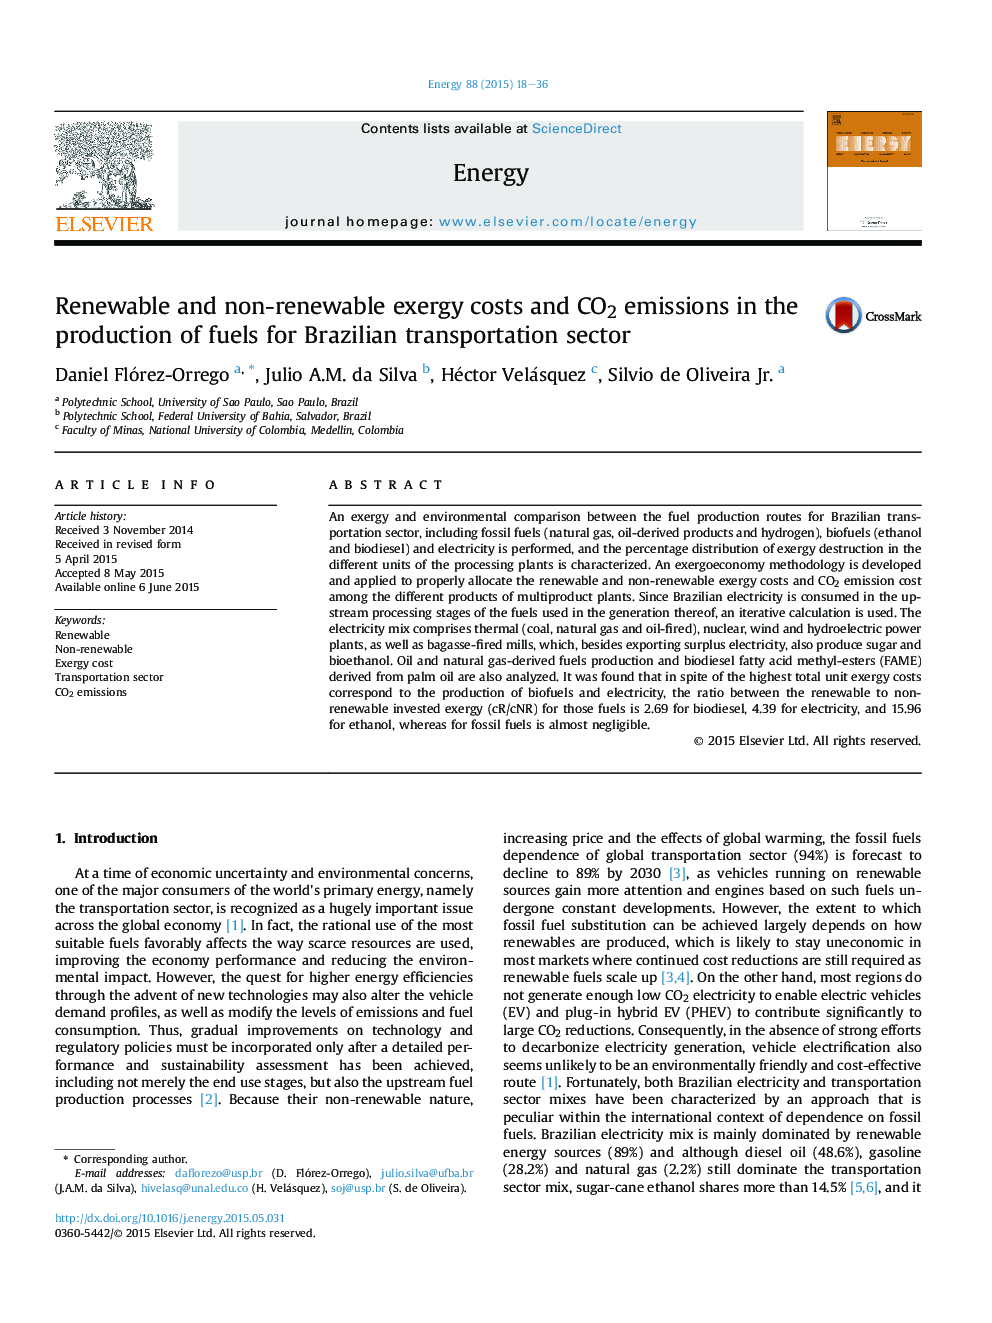 Renewable and non-renewable exergy costs and CO2 emissions in the production of fuels for Brazilian transportation sector